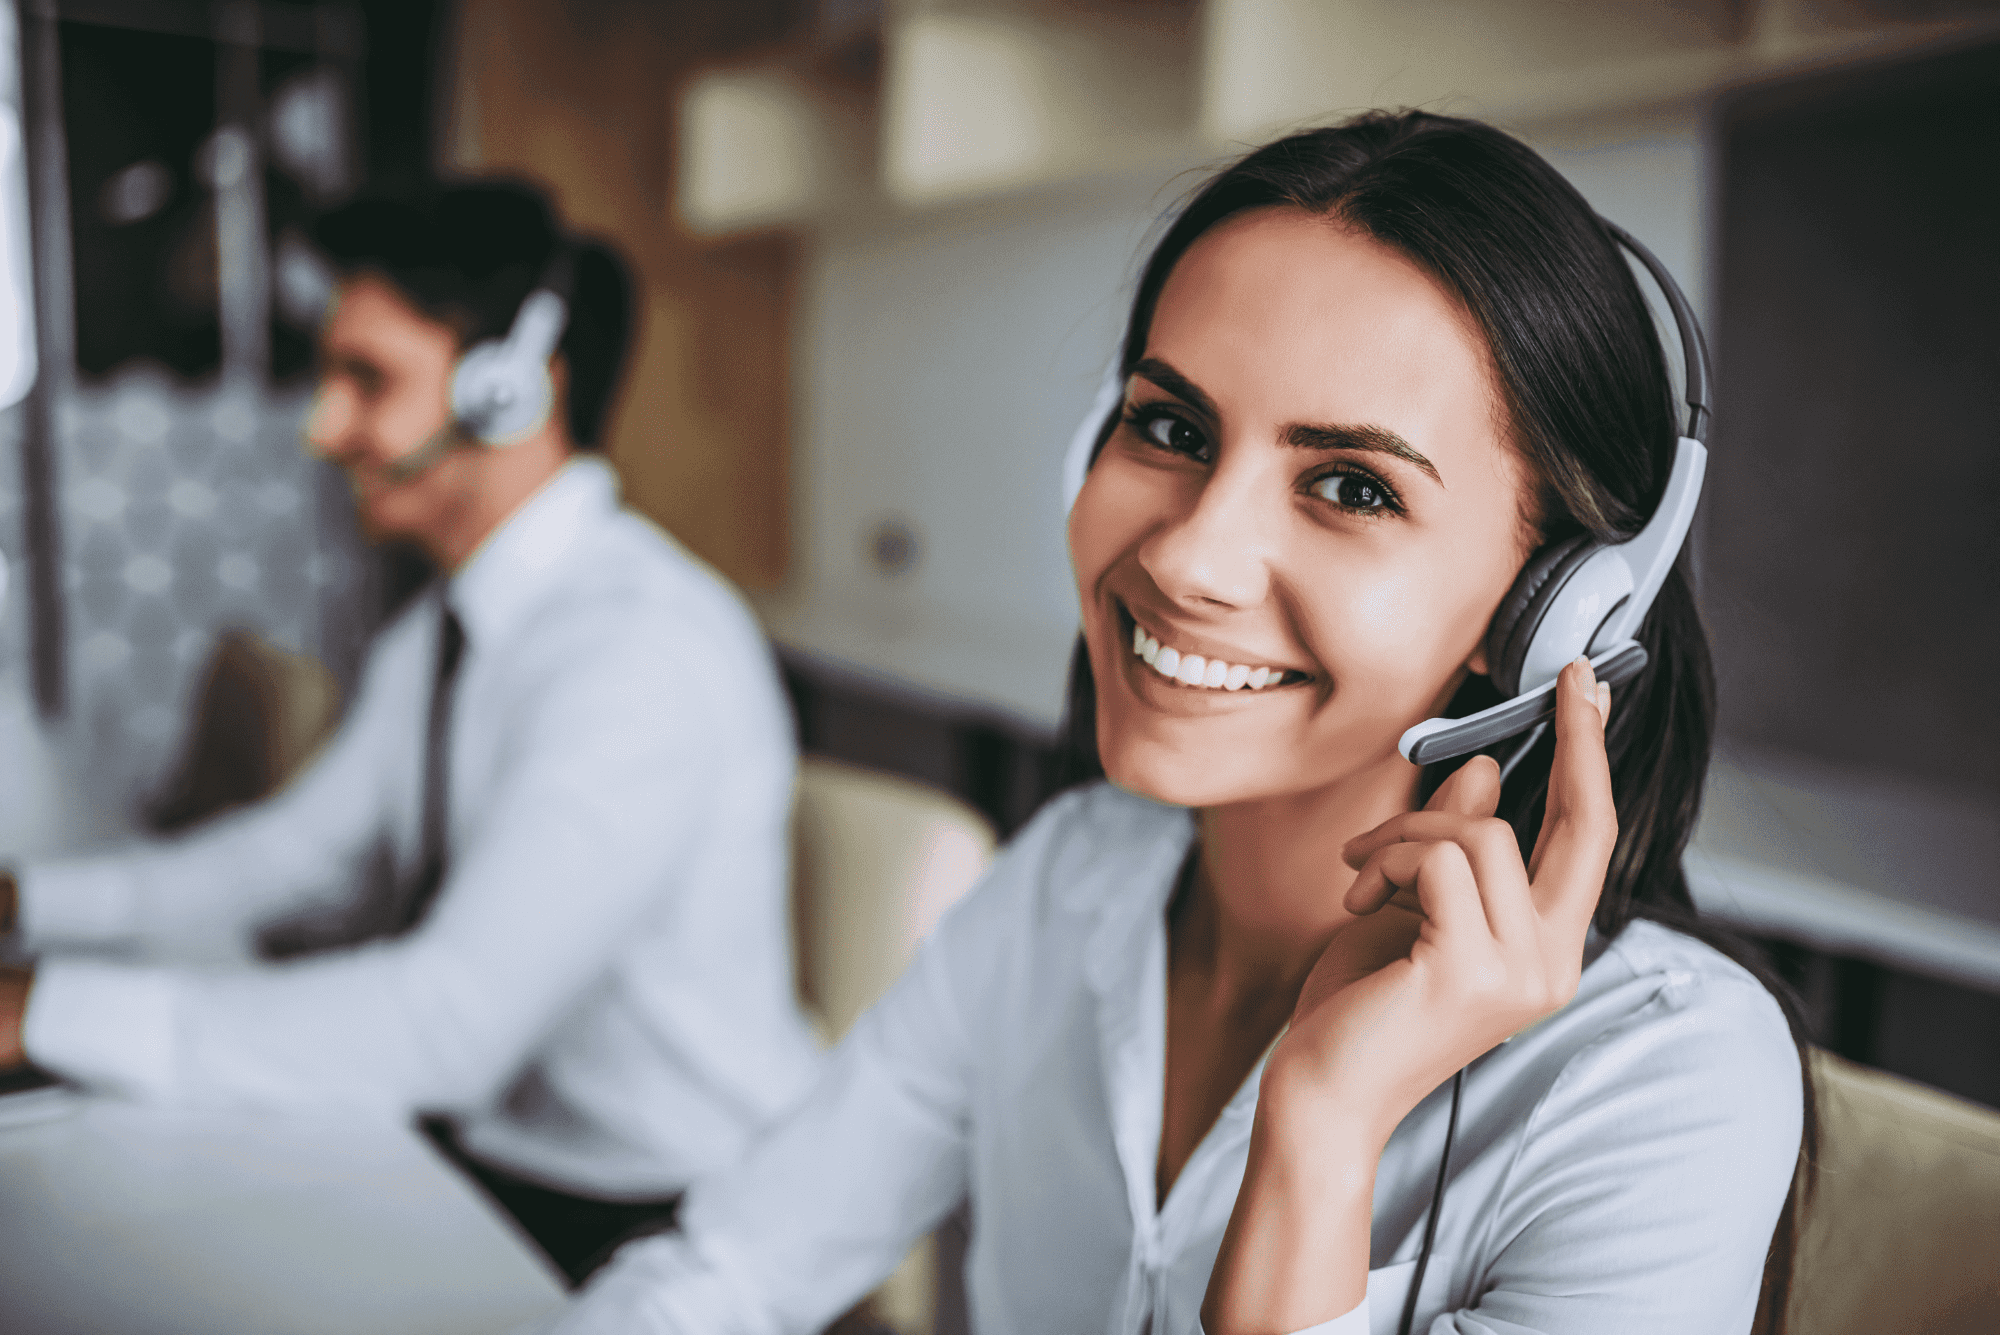 Smiling IT support agent with headset,